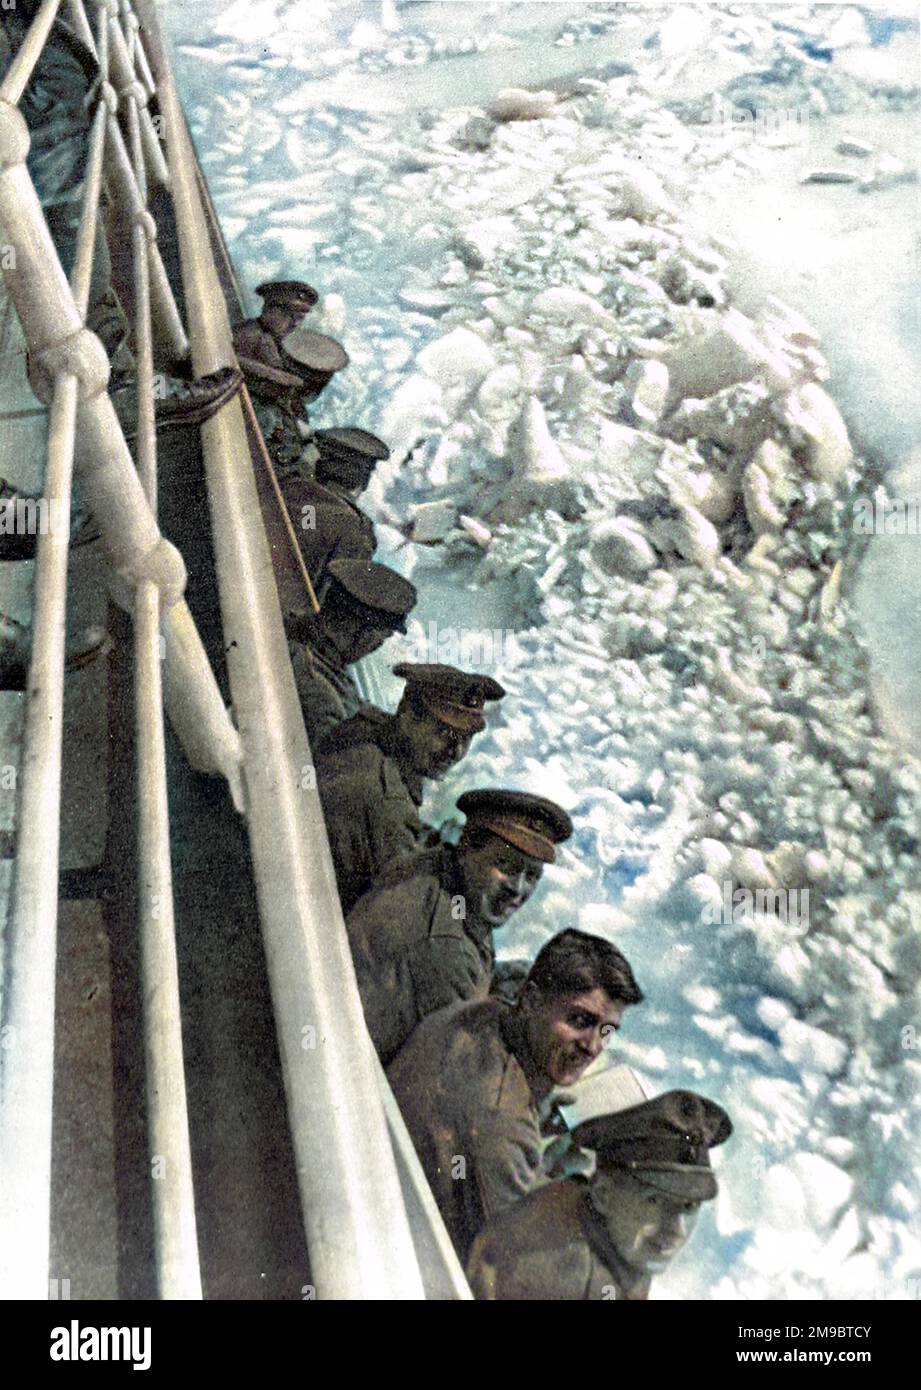 Group of British soldiers leaning over the rail on the deck of a transport ship bound for Russia. On the right of the image one can see the ice that the ship is plowing through. The soldiers were men of a British Armoured-Car detachment. Stock Photo